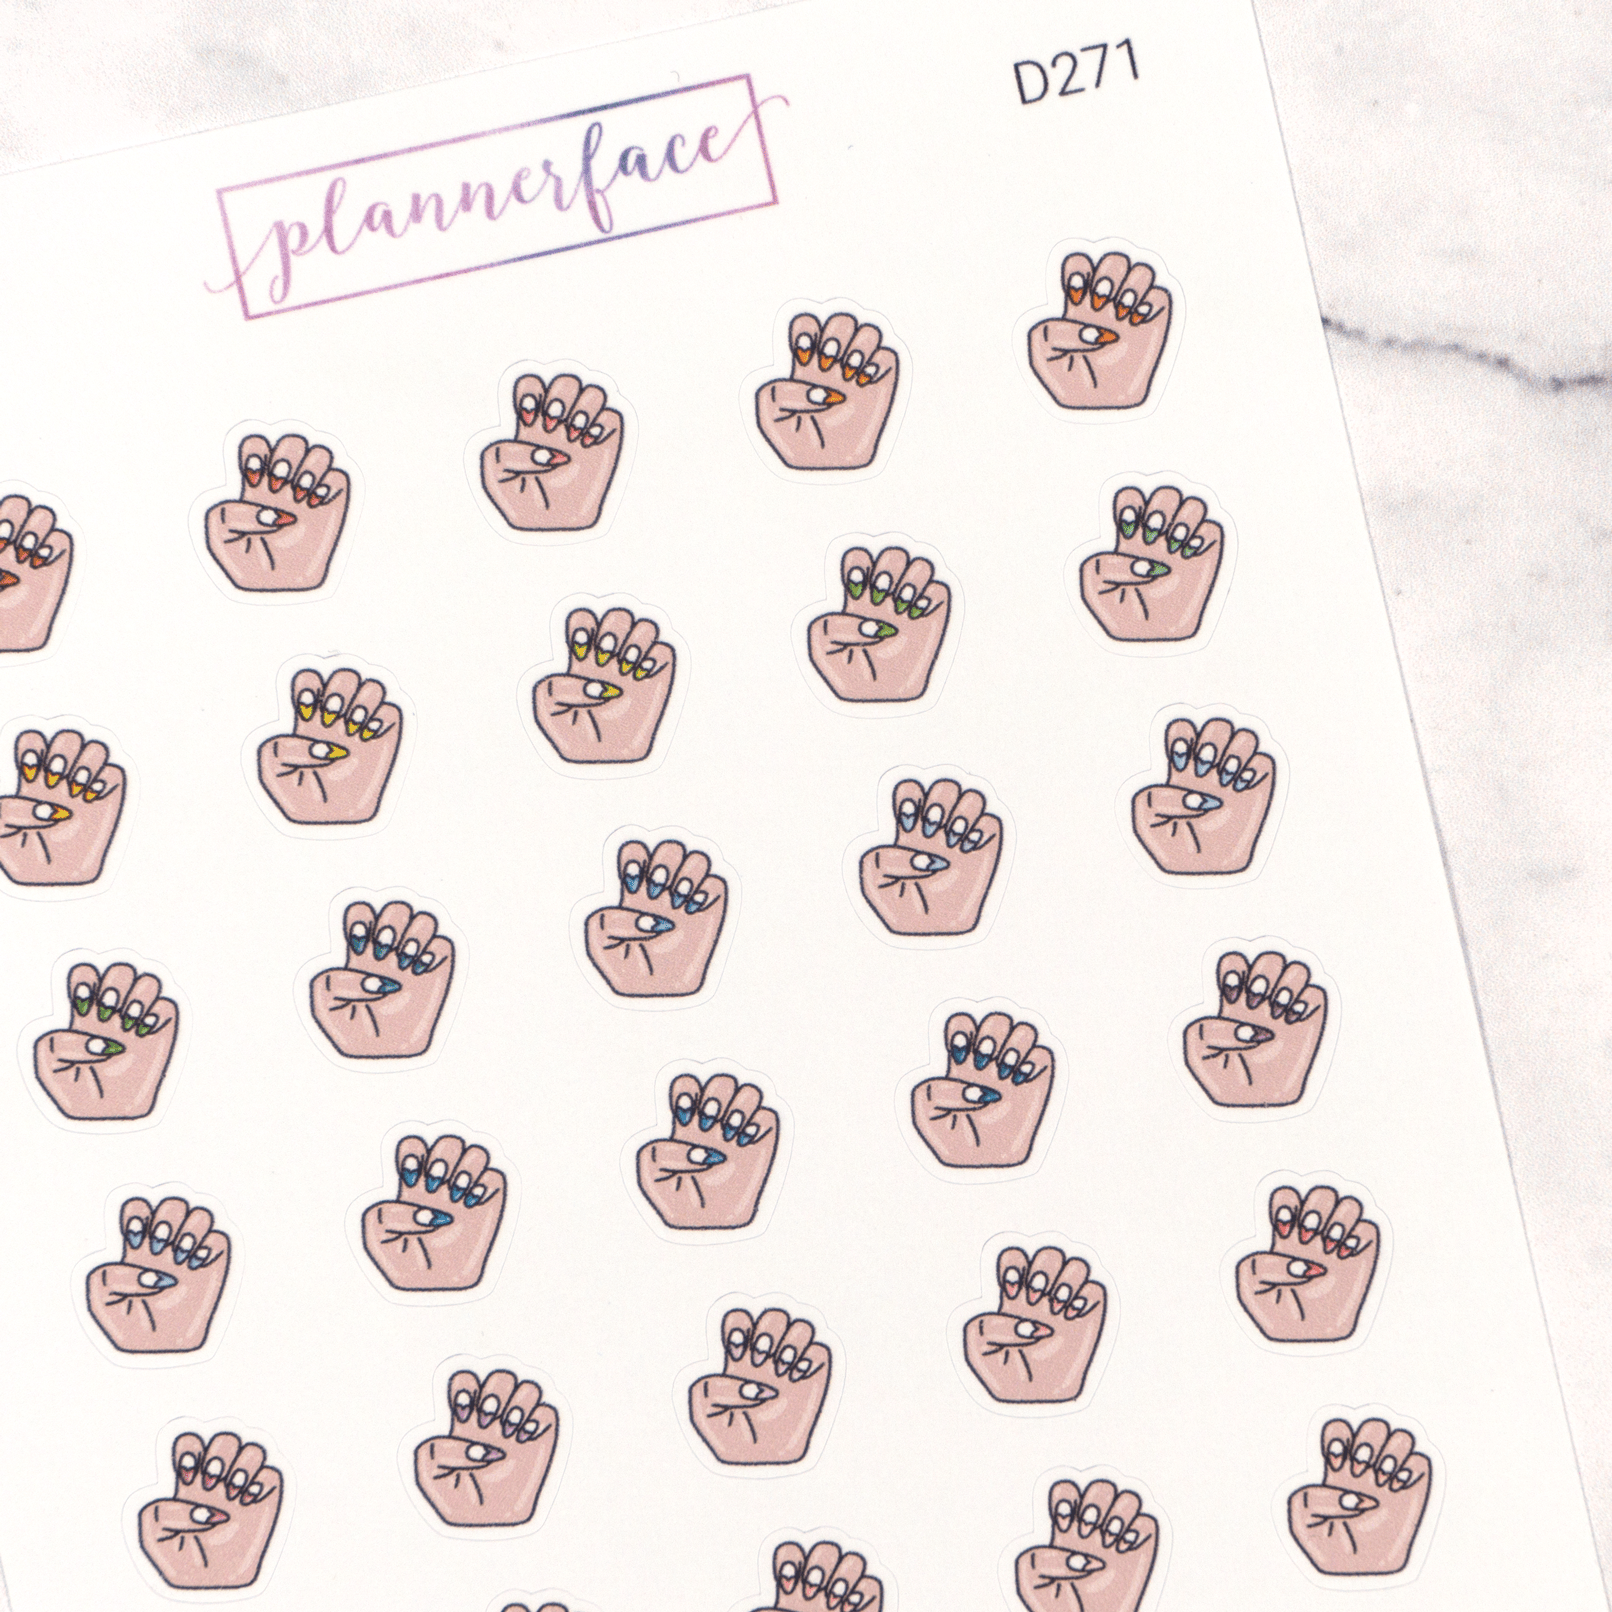 Painted Nails (Dark) Multicolour Doodles by Plannerface